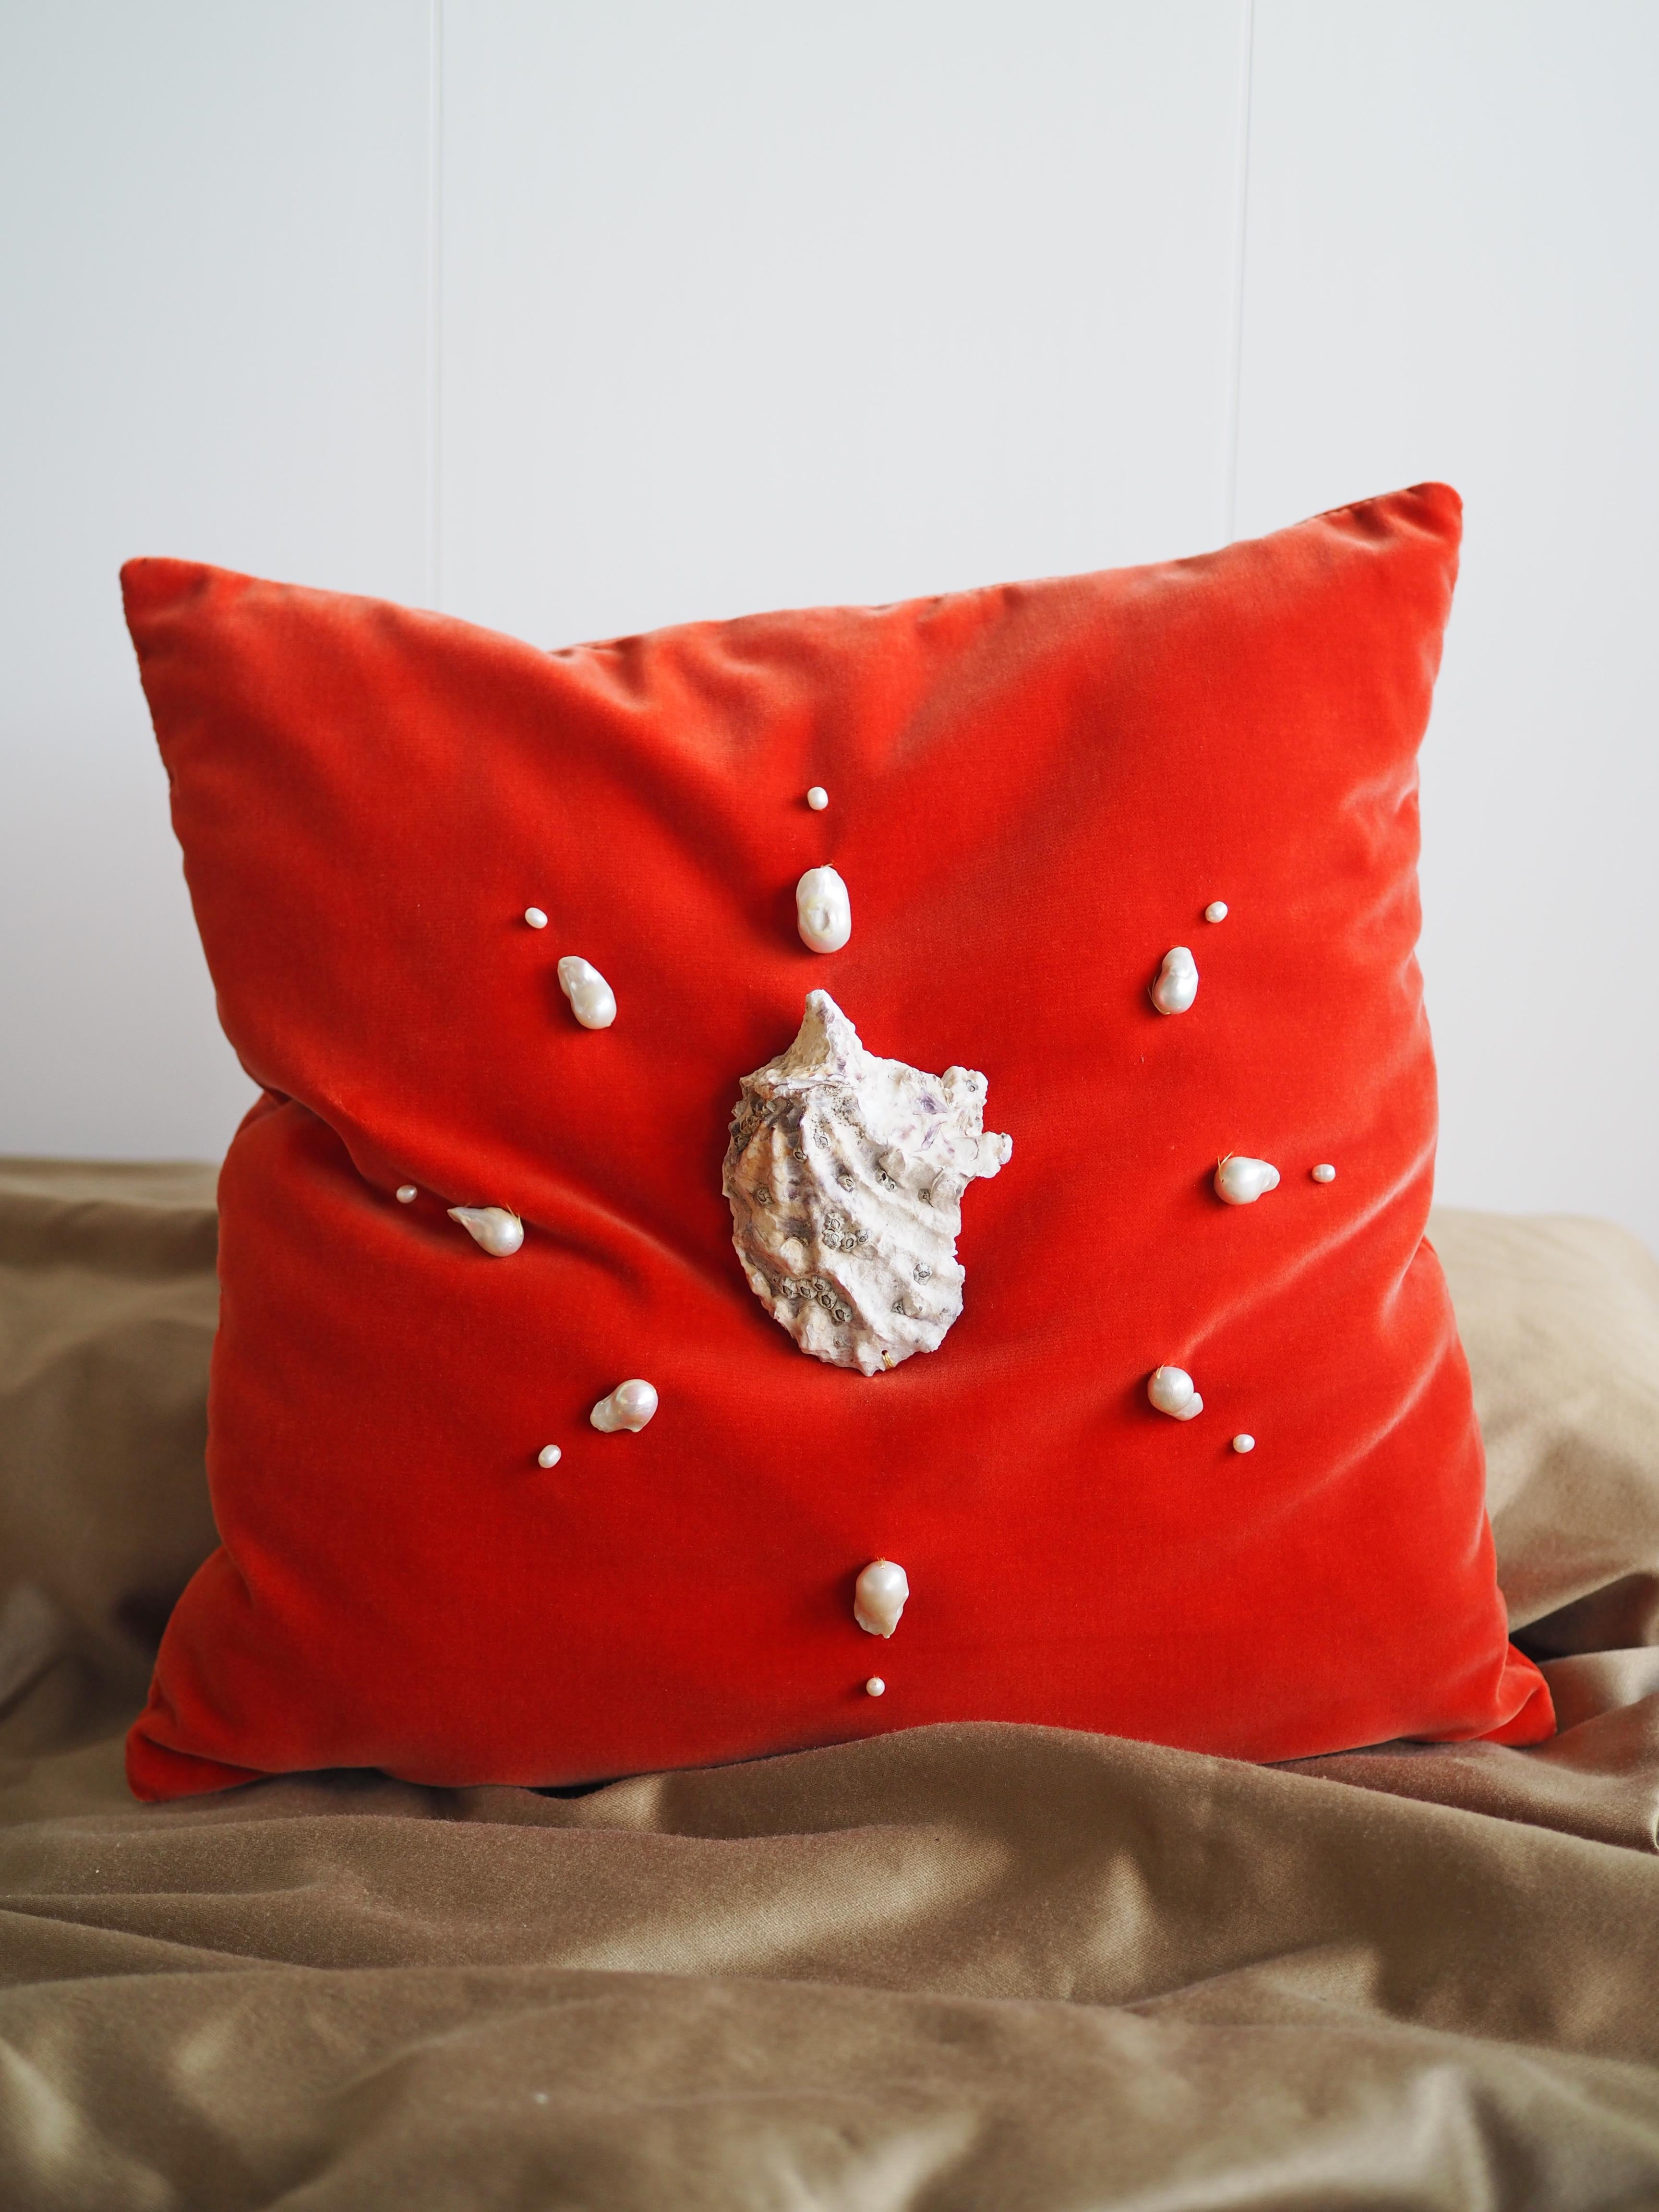 Bon Appetit cushion by Culto Ponsoda
Dimensions: D 8 x W 50 x H 50 cm
Materials: Velvet, seashells, pearls.
Available in other colors and sizes.

Decorative cushions made of velvet with decorations of seashells and natural freshwater